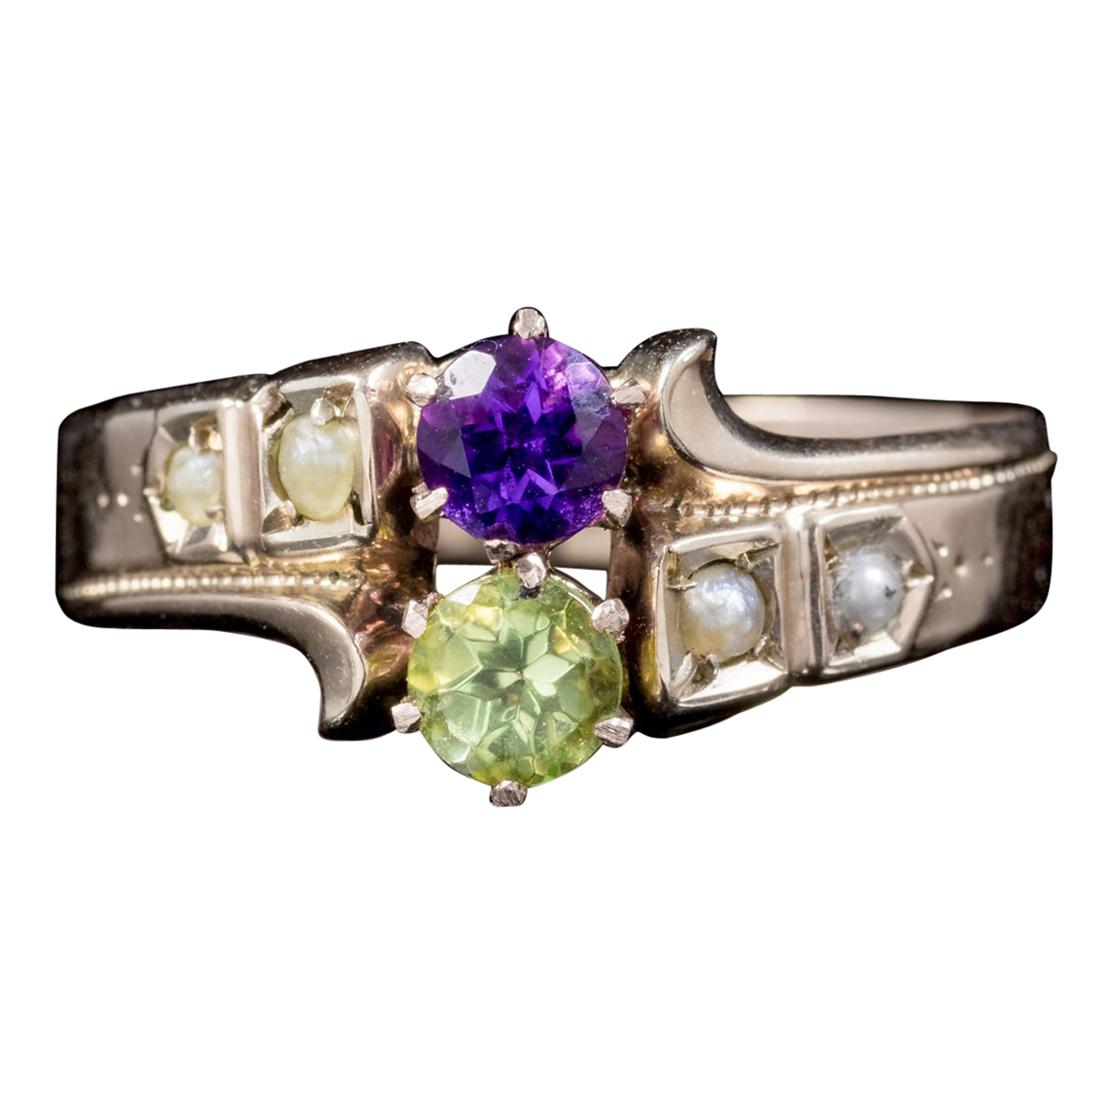 Antique Victorian Amethyst Pearl Peridot Suffragette Ring 18 Carat Gold